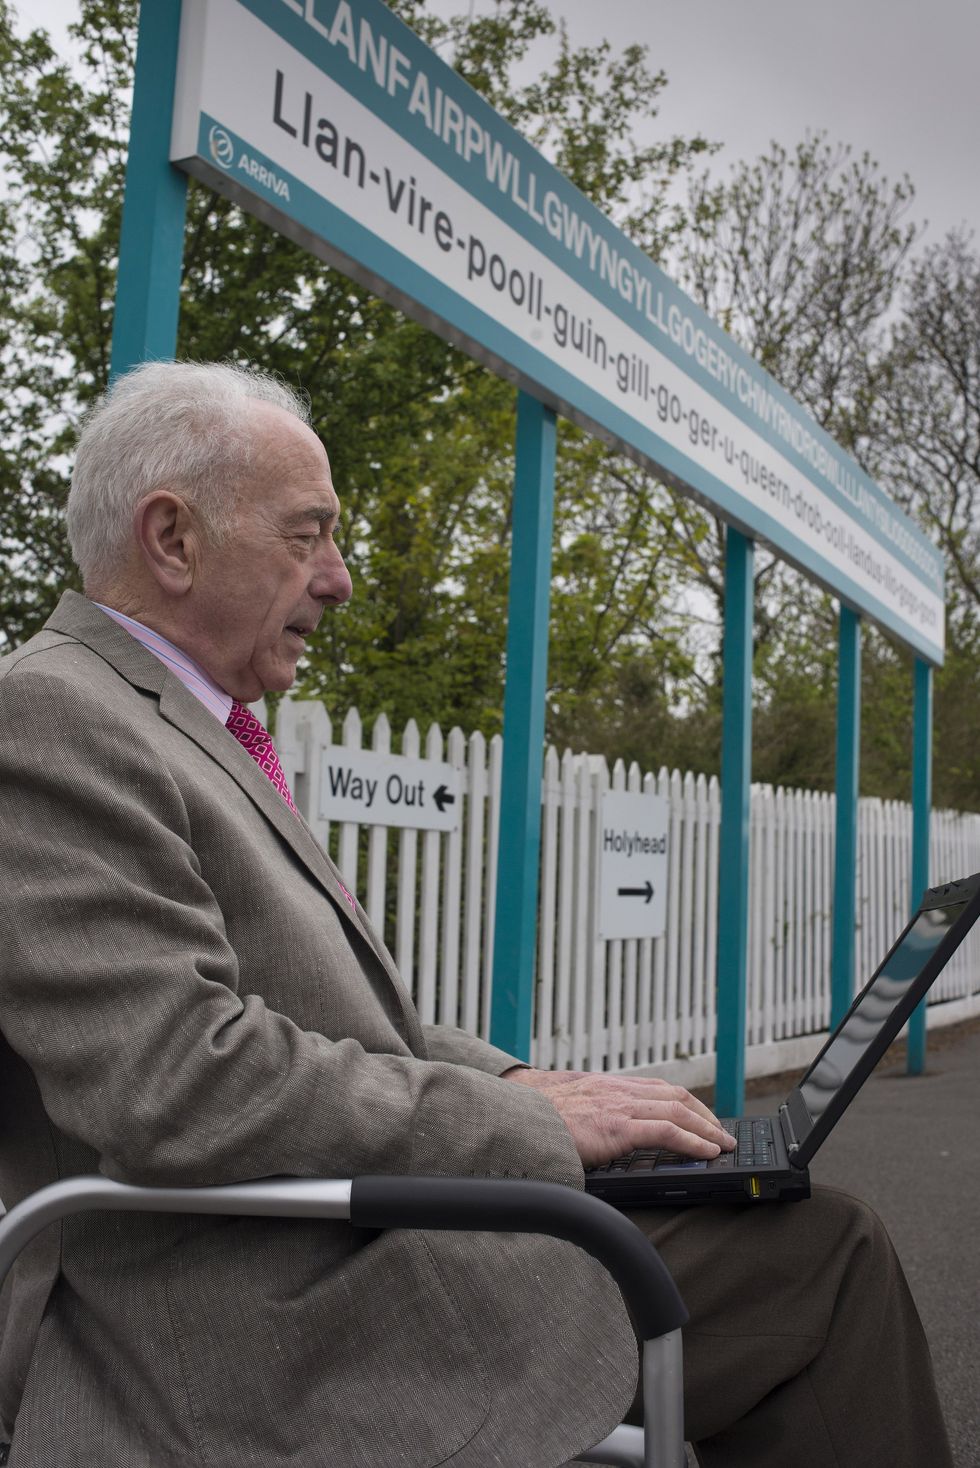 Pensioner and charity worker Alwyn Ellis uses a laptop at the station (Welsh Government News/PA)